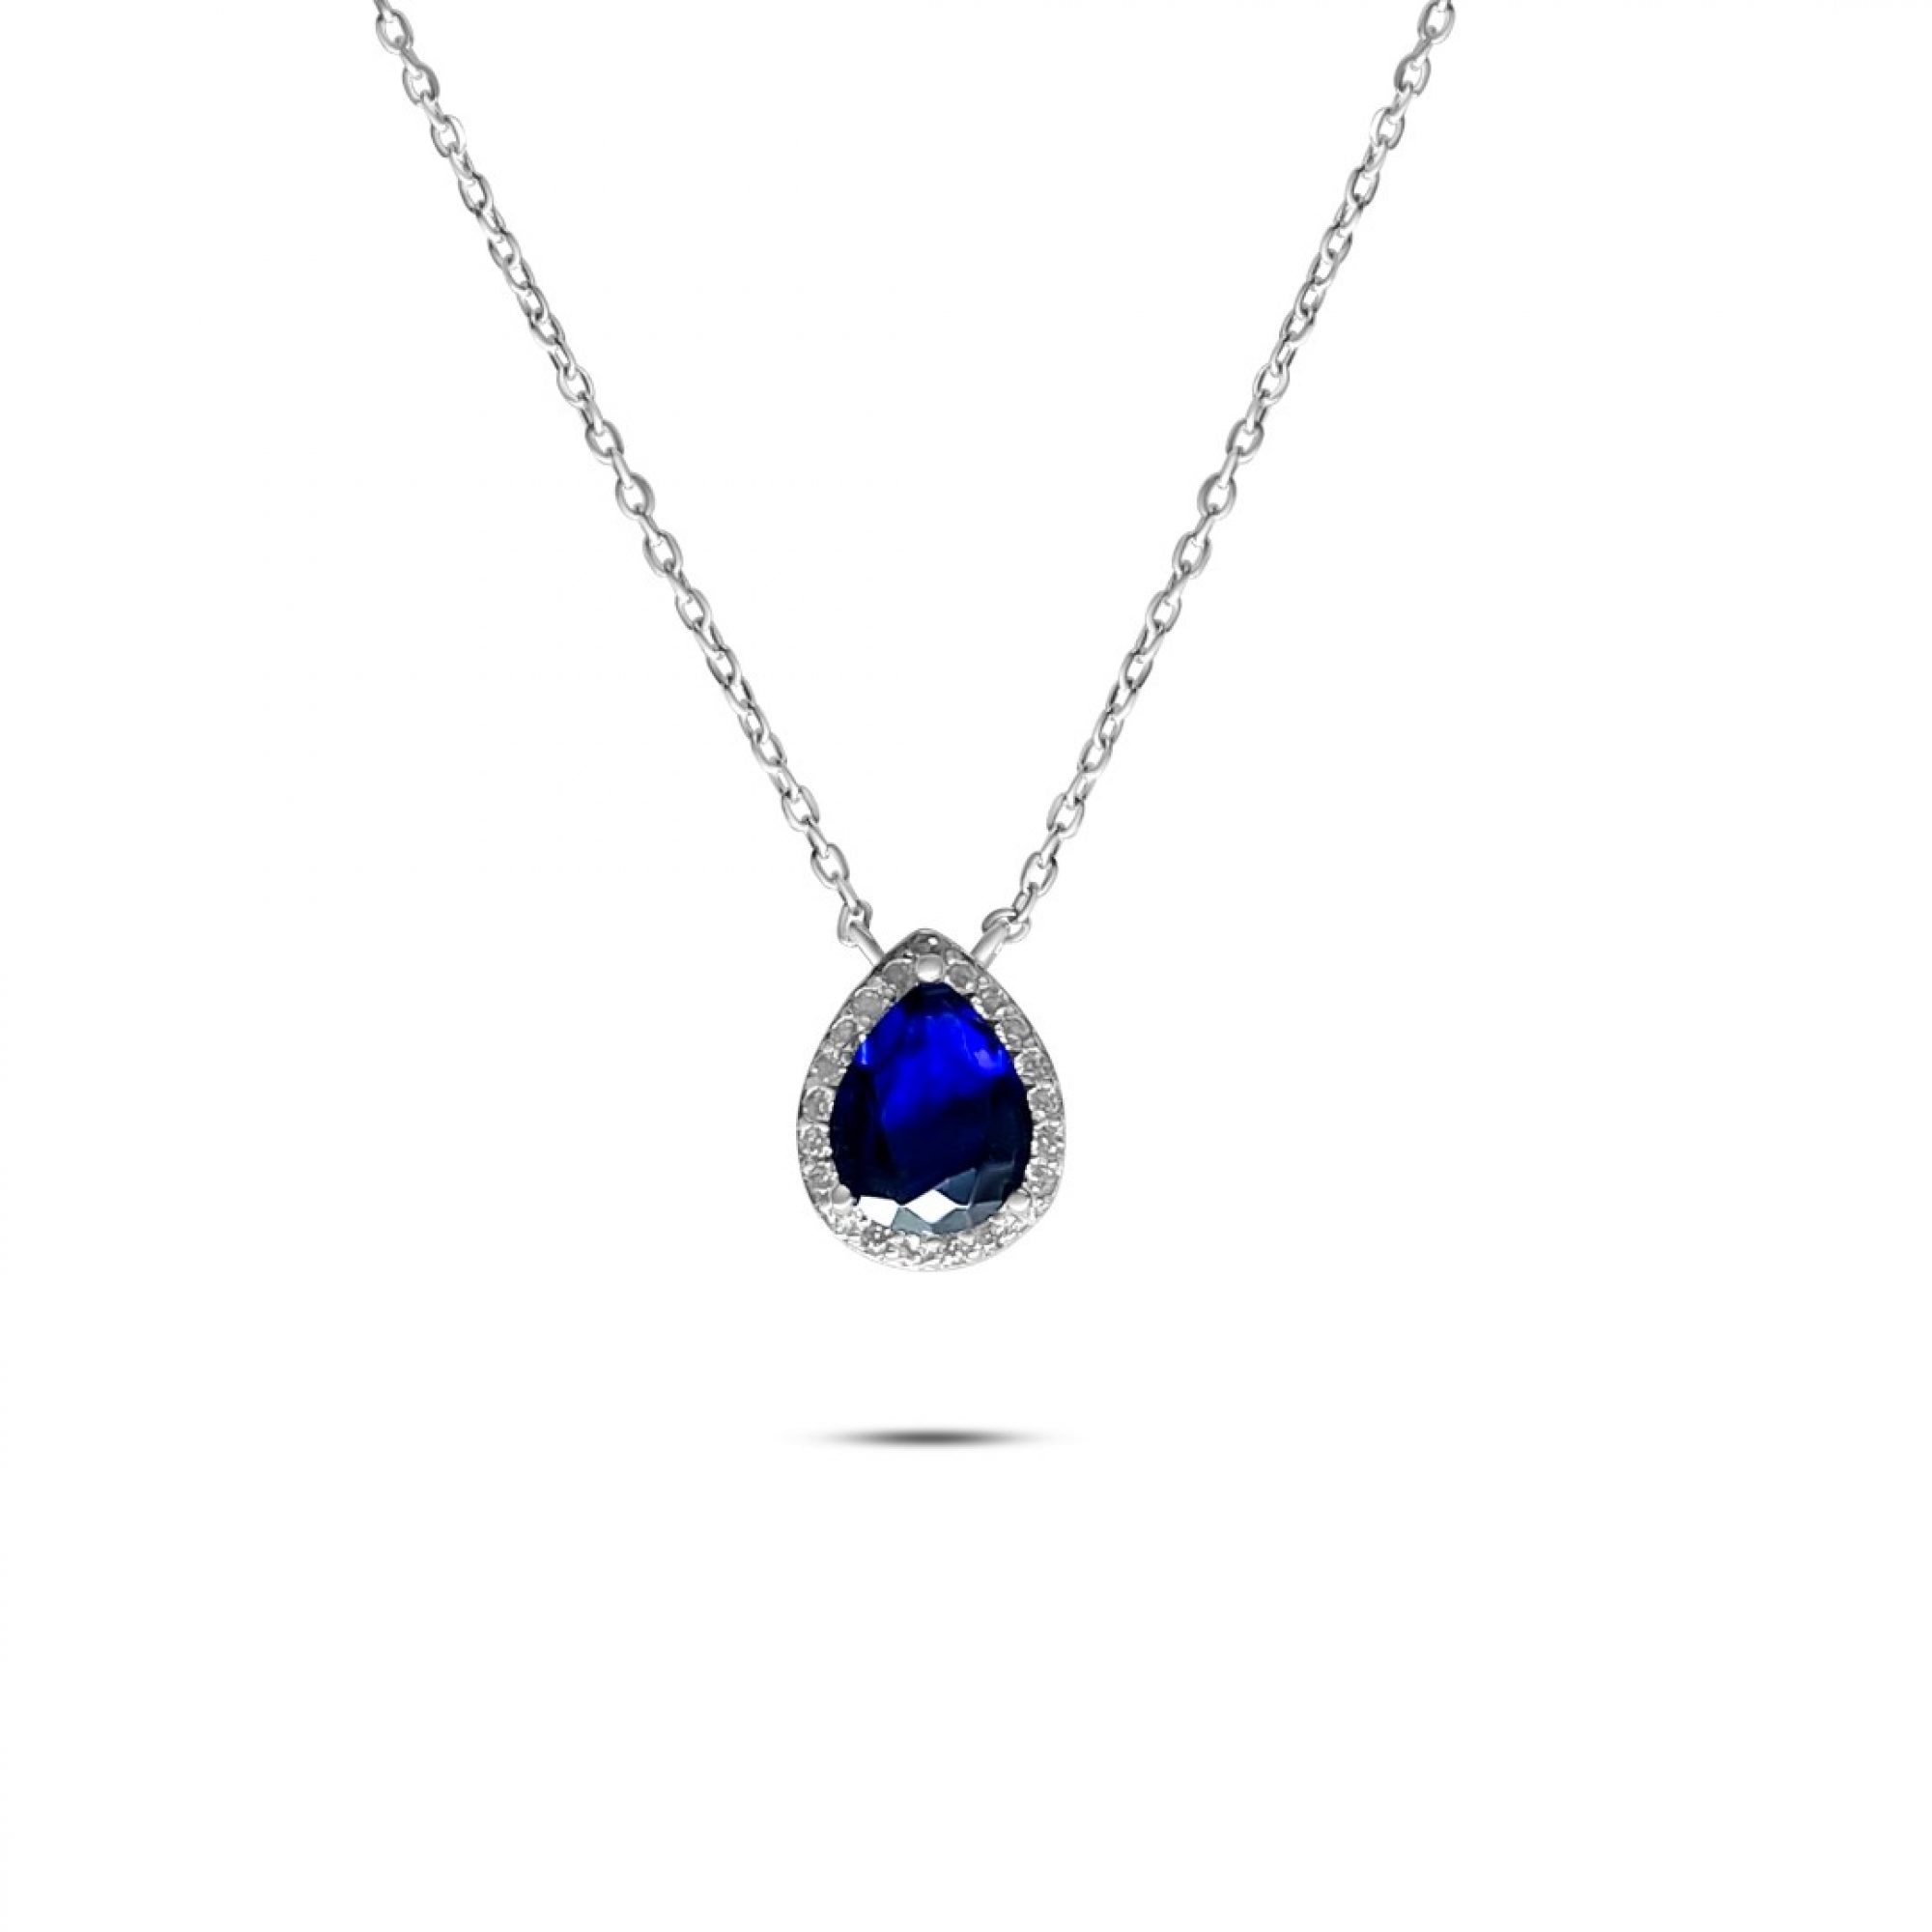 Necklace with sapphire and zircon stones